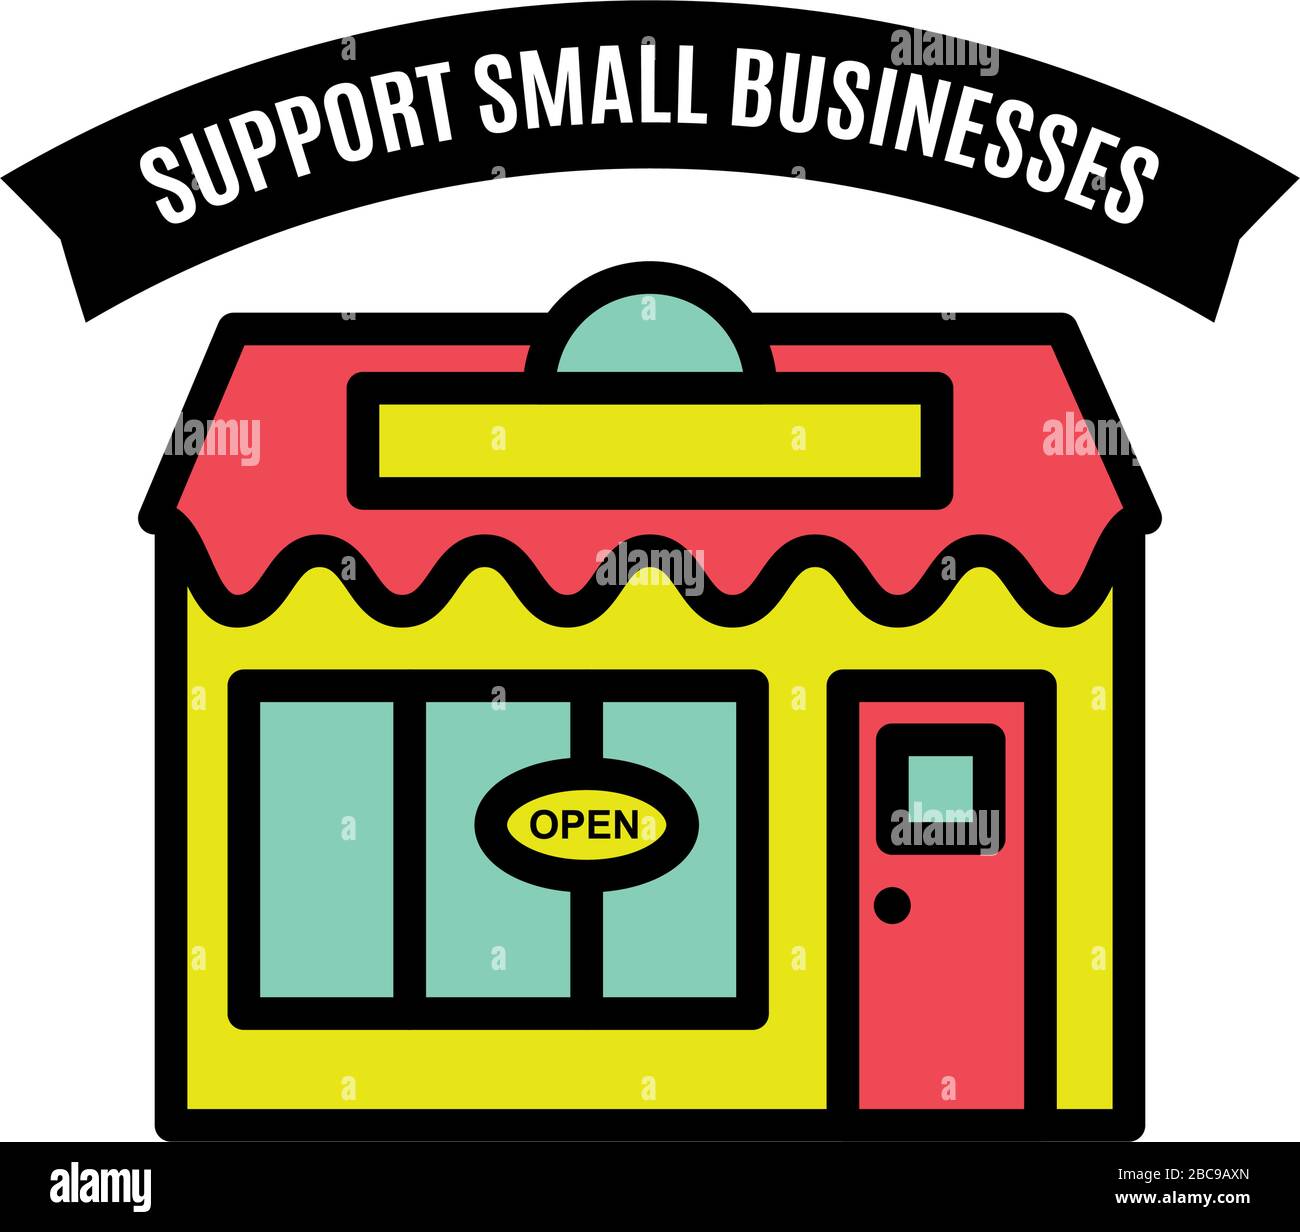 A simple storefront illustration icon in support of small businesses. Vector EPS 10 available. Stock Vector